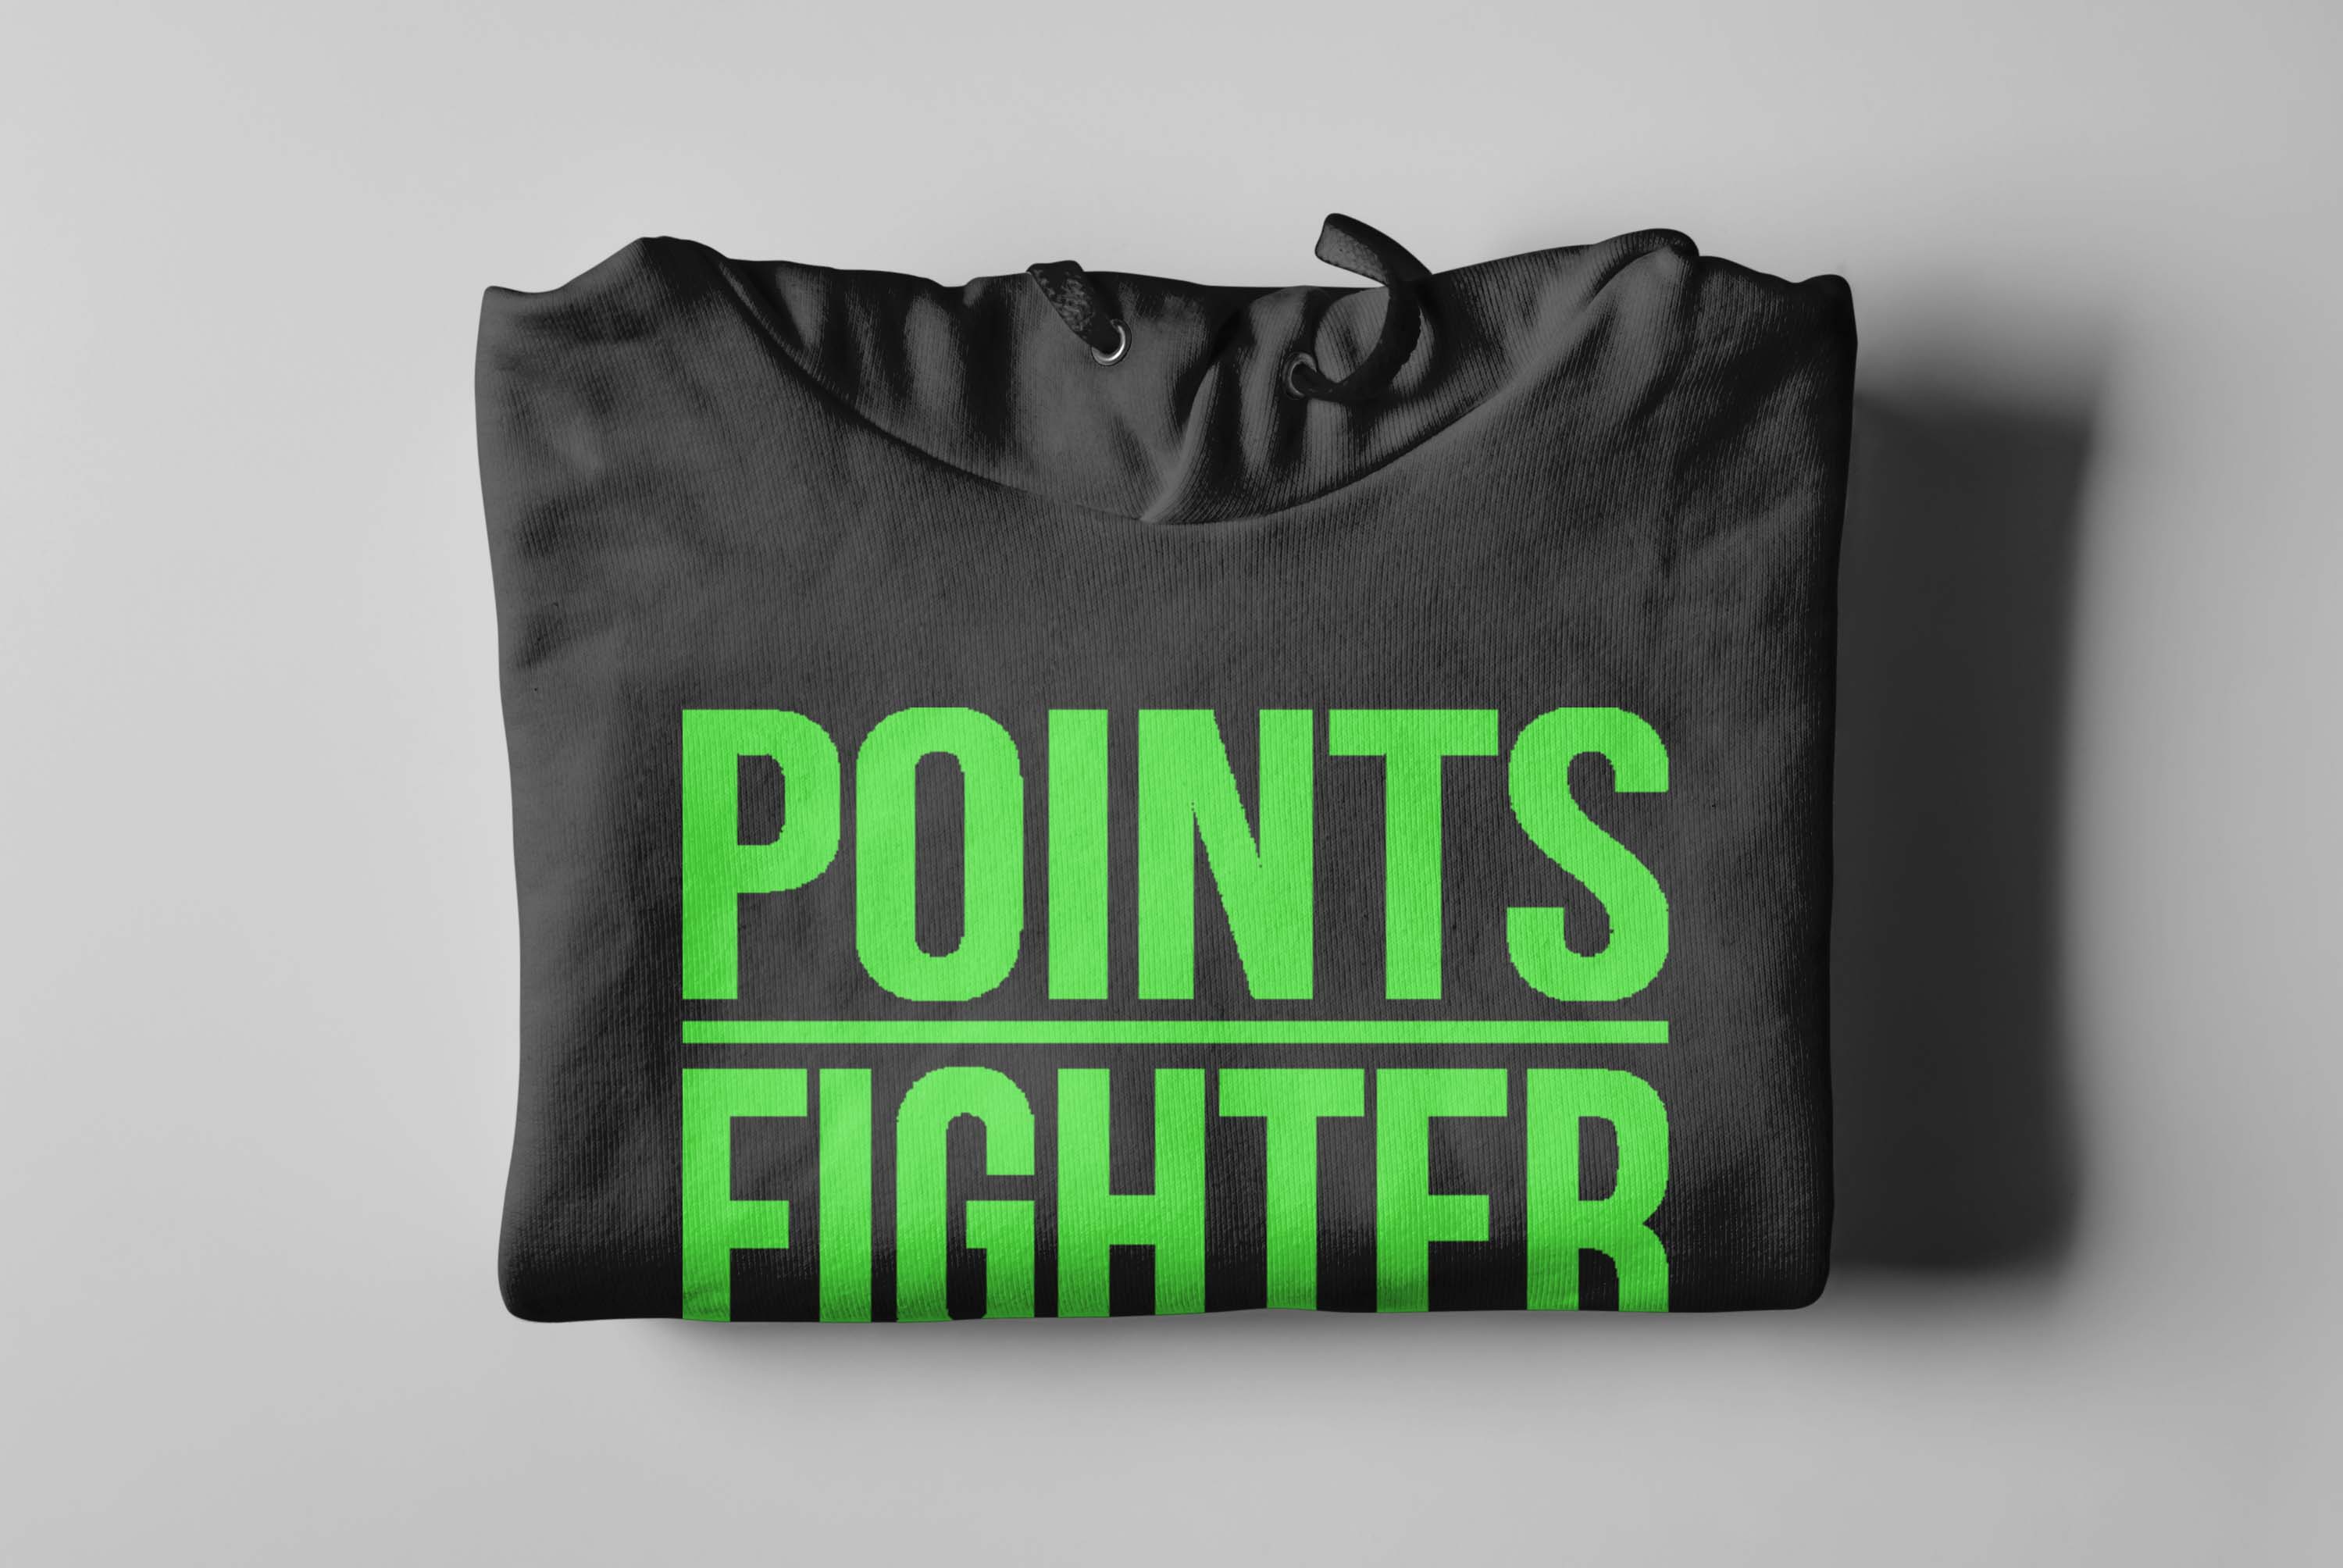 Points Fighter Hoodie - Neon Green